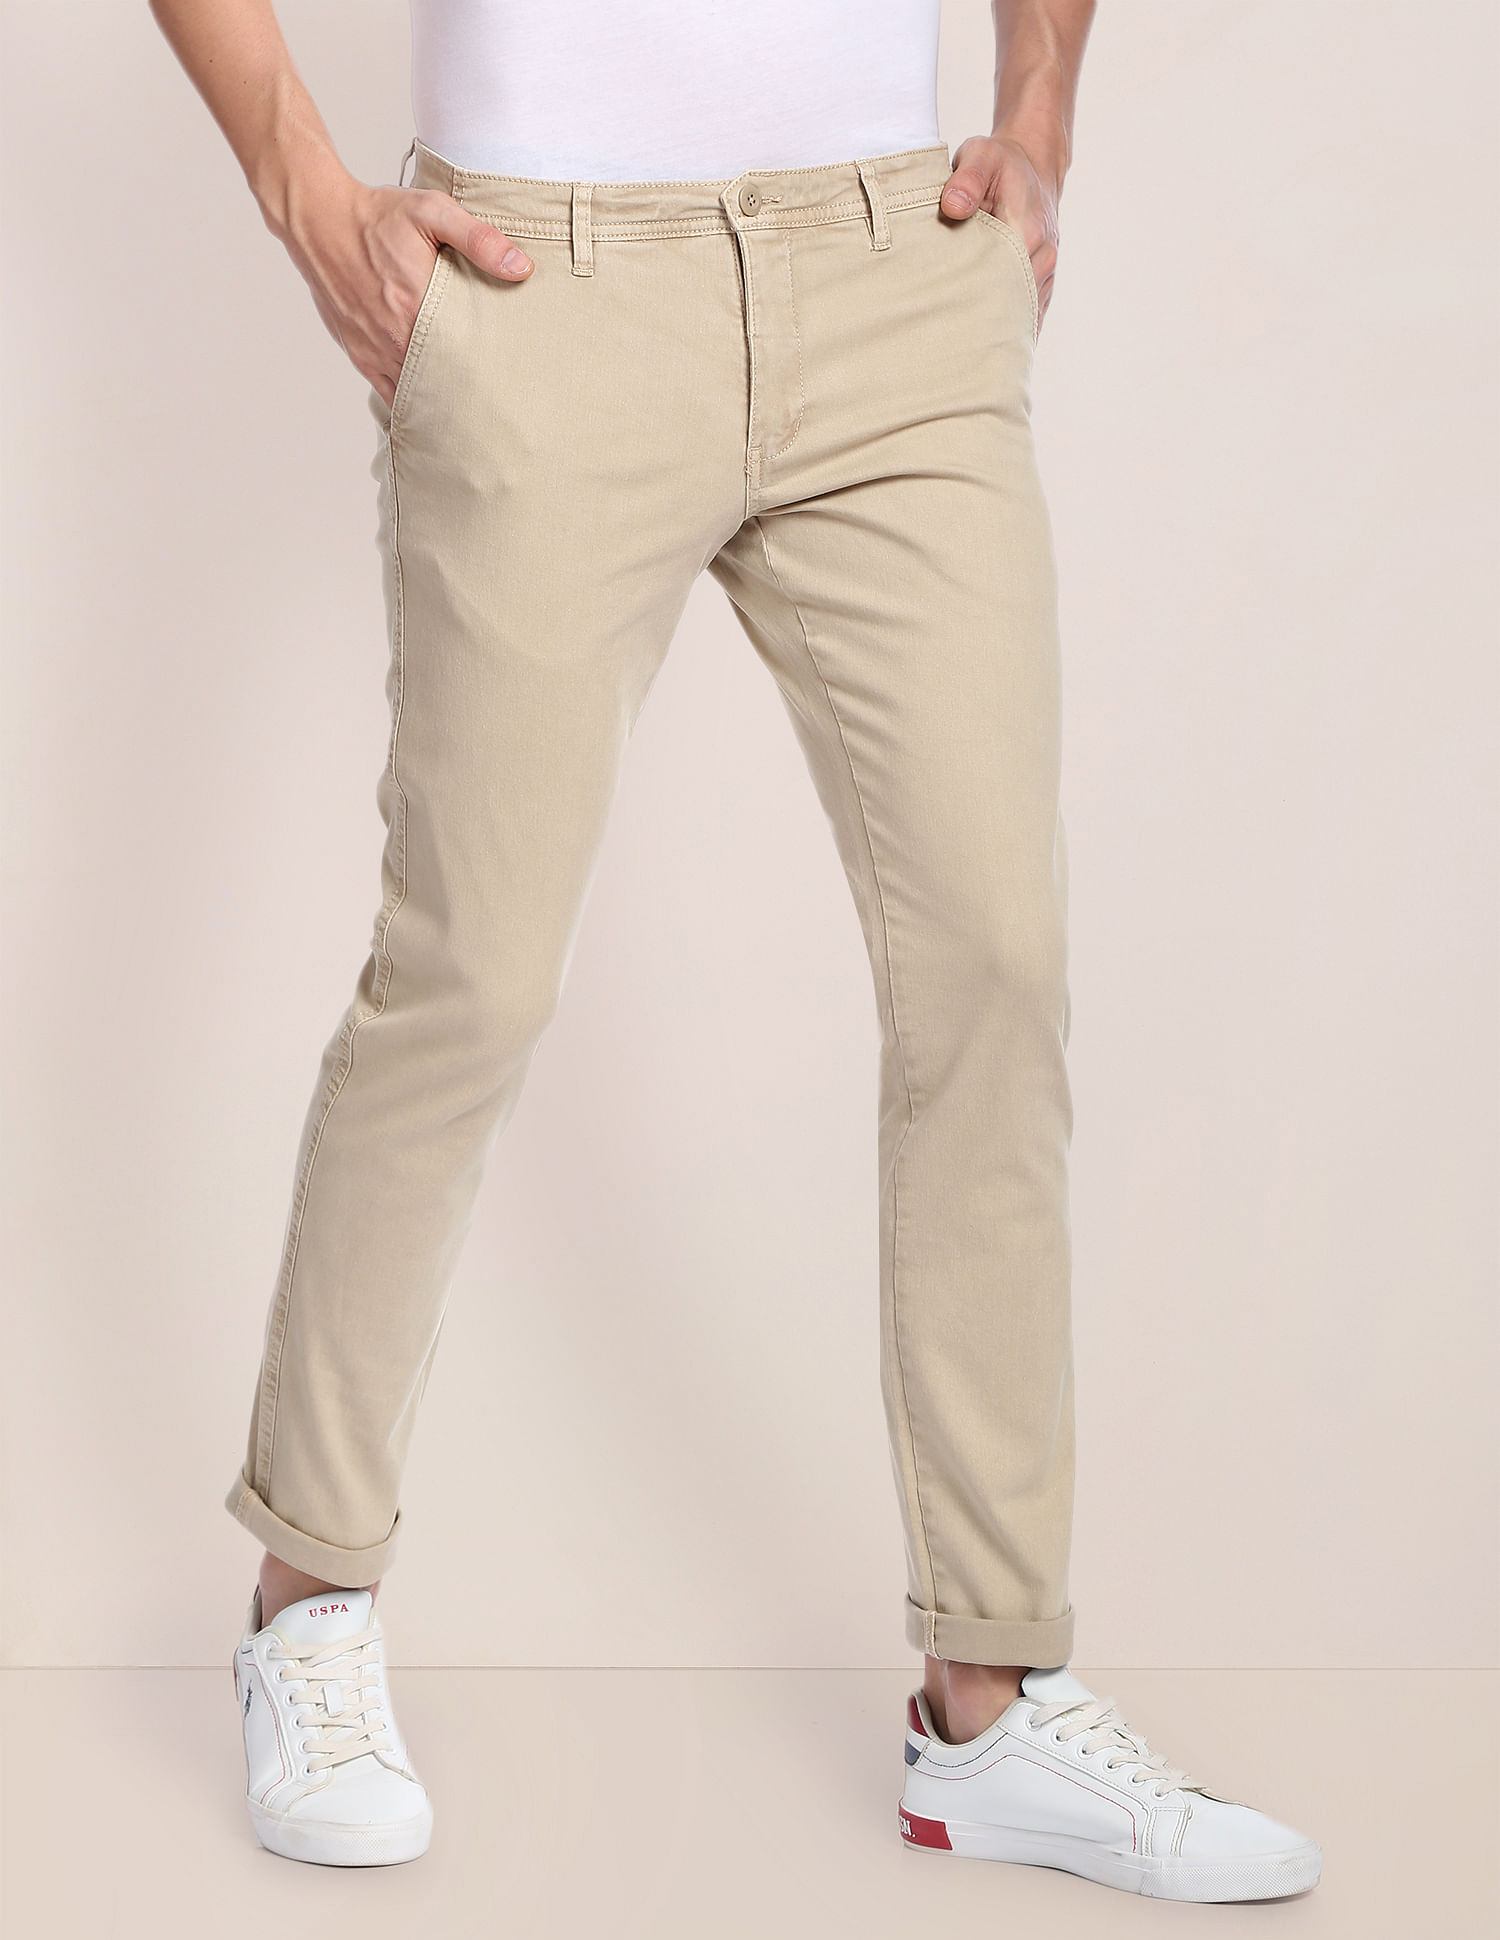 Nation Polo Club Trousers  Buy Nation Polo Club Trousers online in India